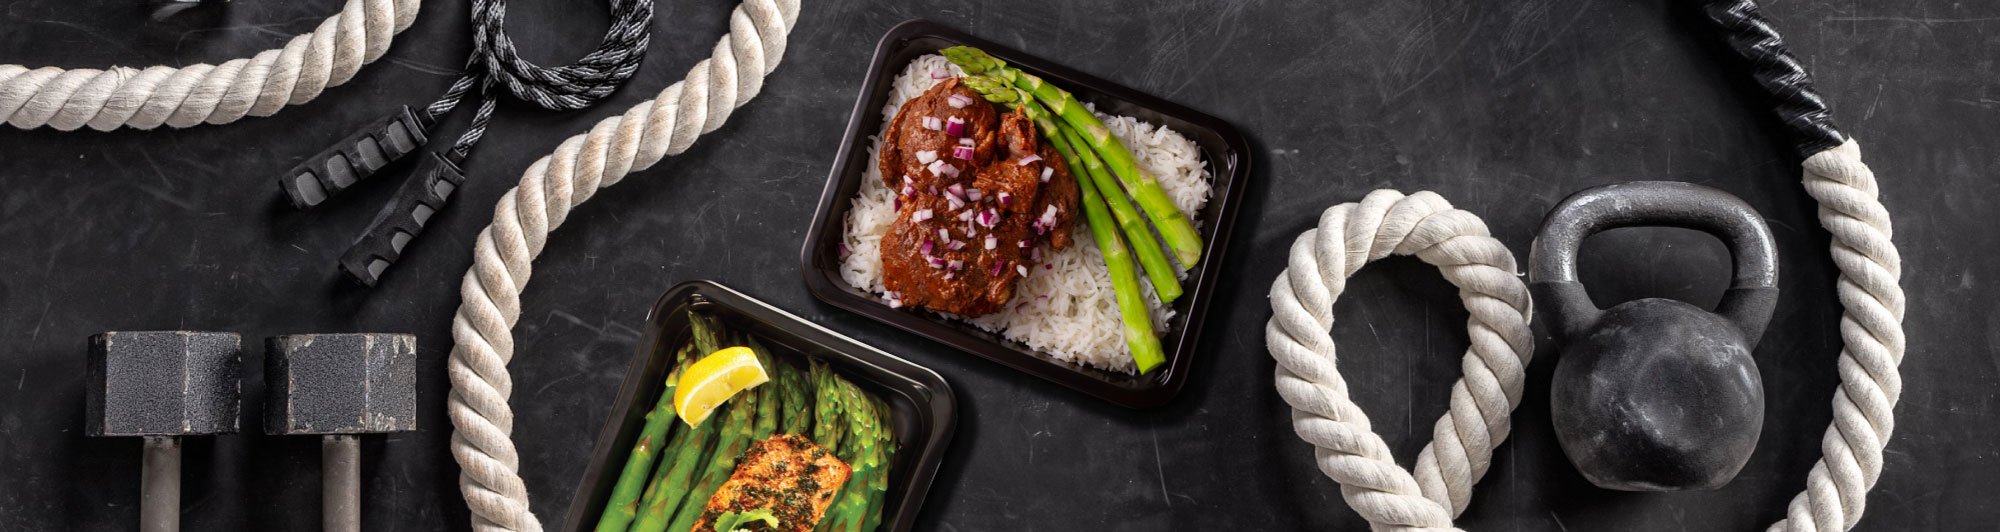 Heatlhy  meals served in a microwave safe  meal prep containers